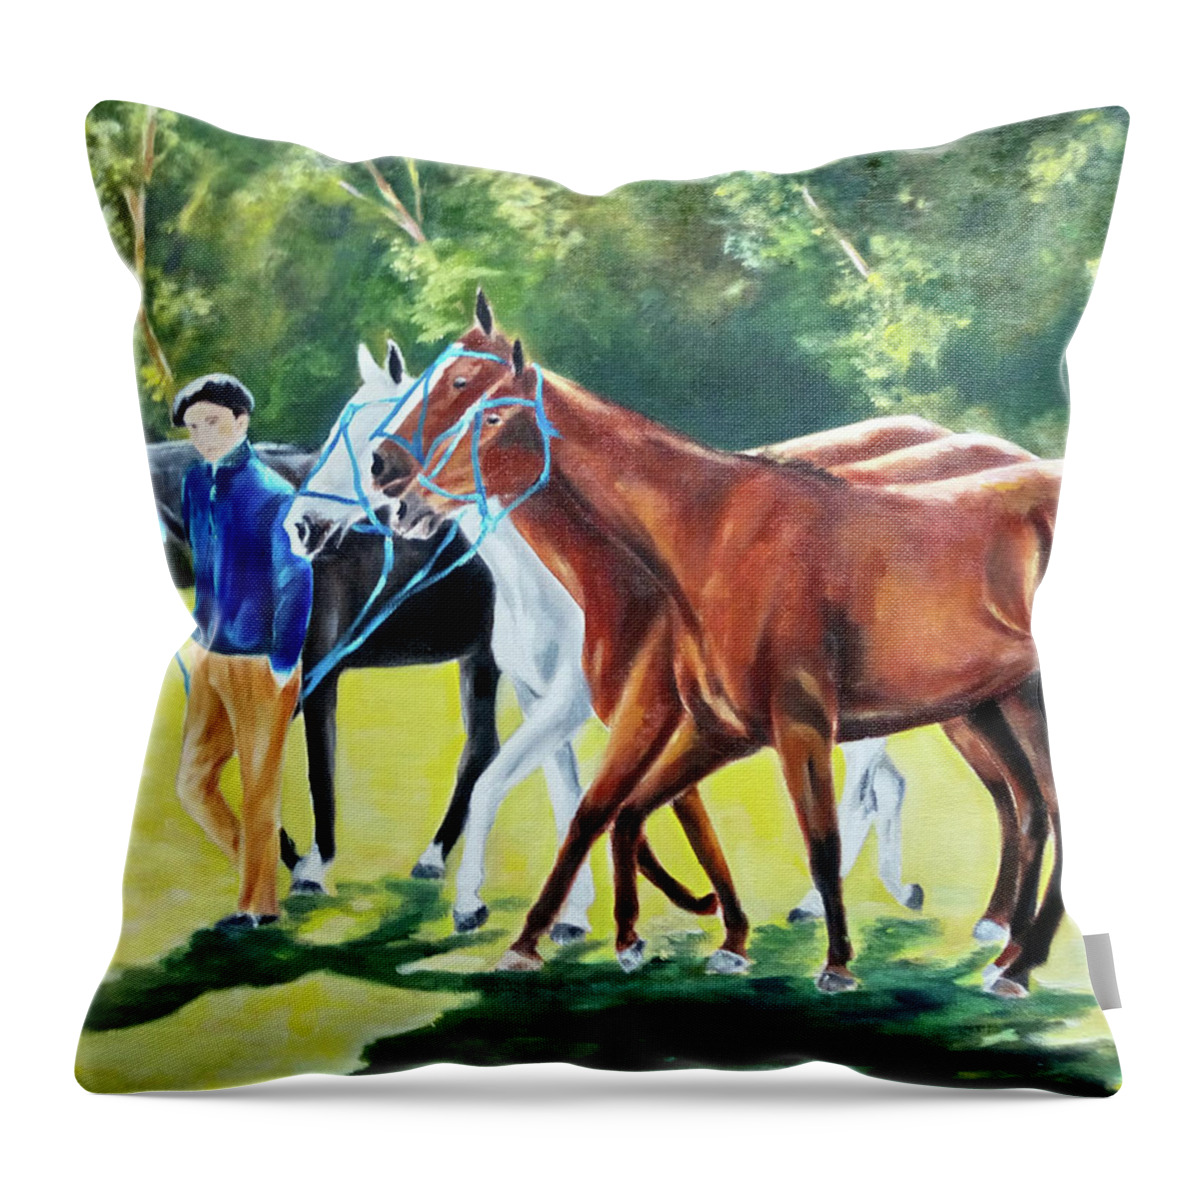 Wallpaint Throw Pillow featuring the painting Llegada by Carlos Jose Barbieri